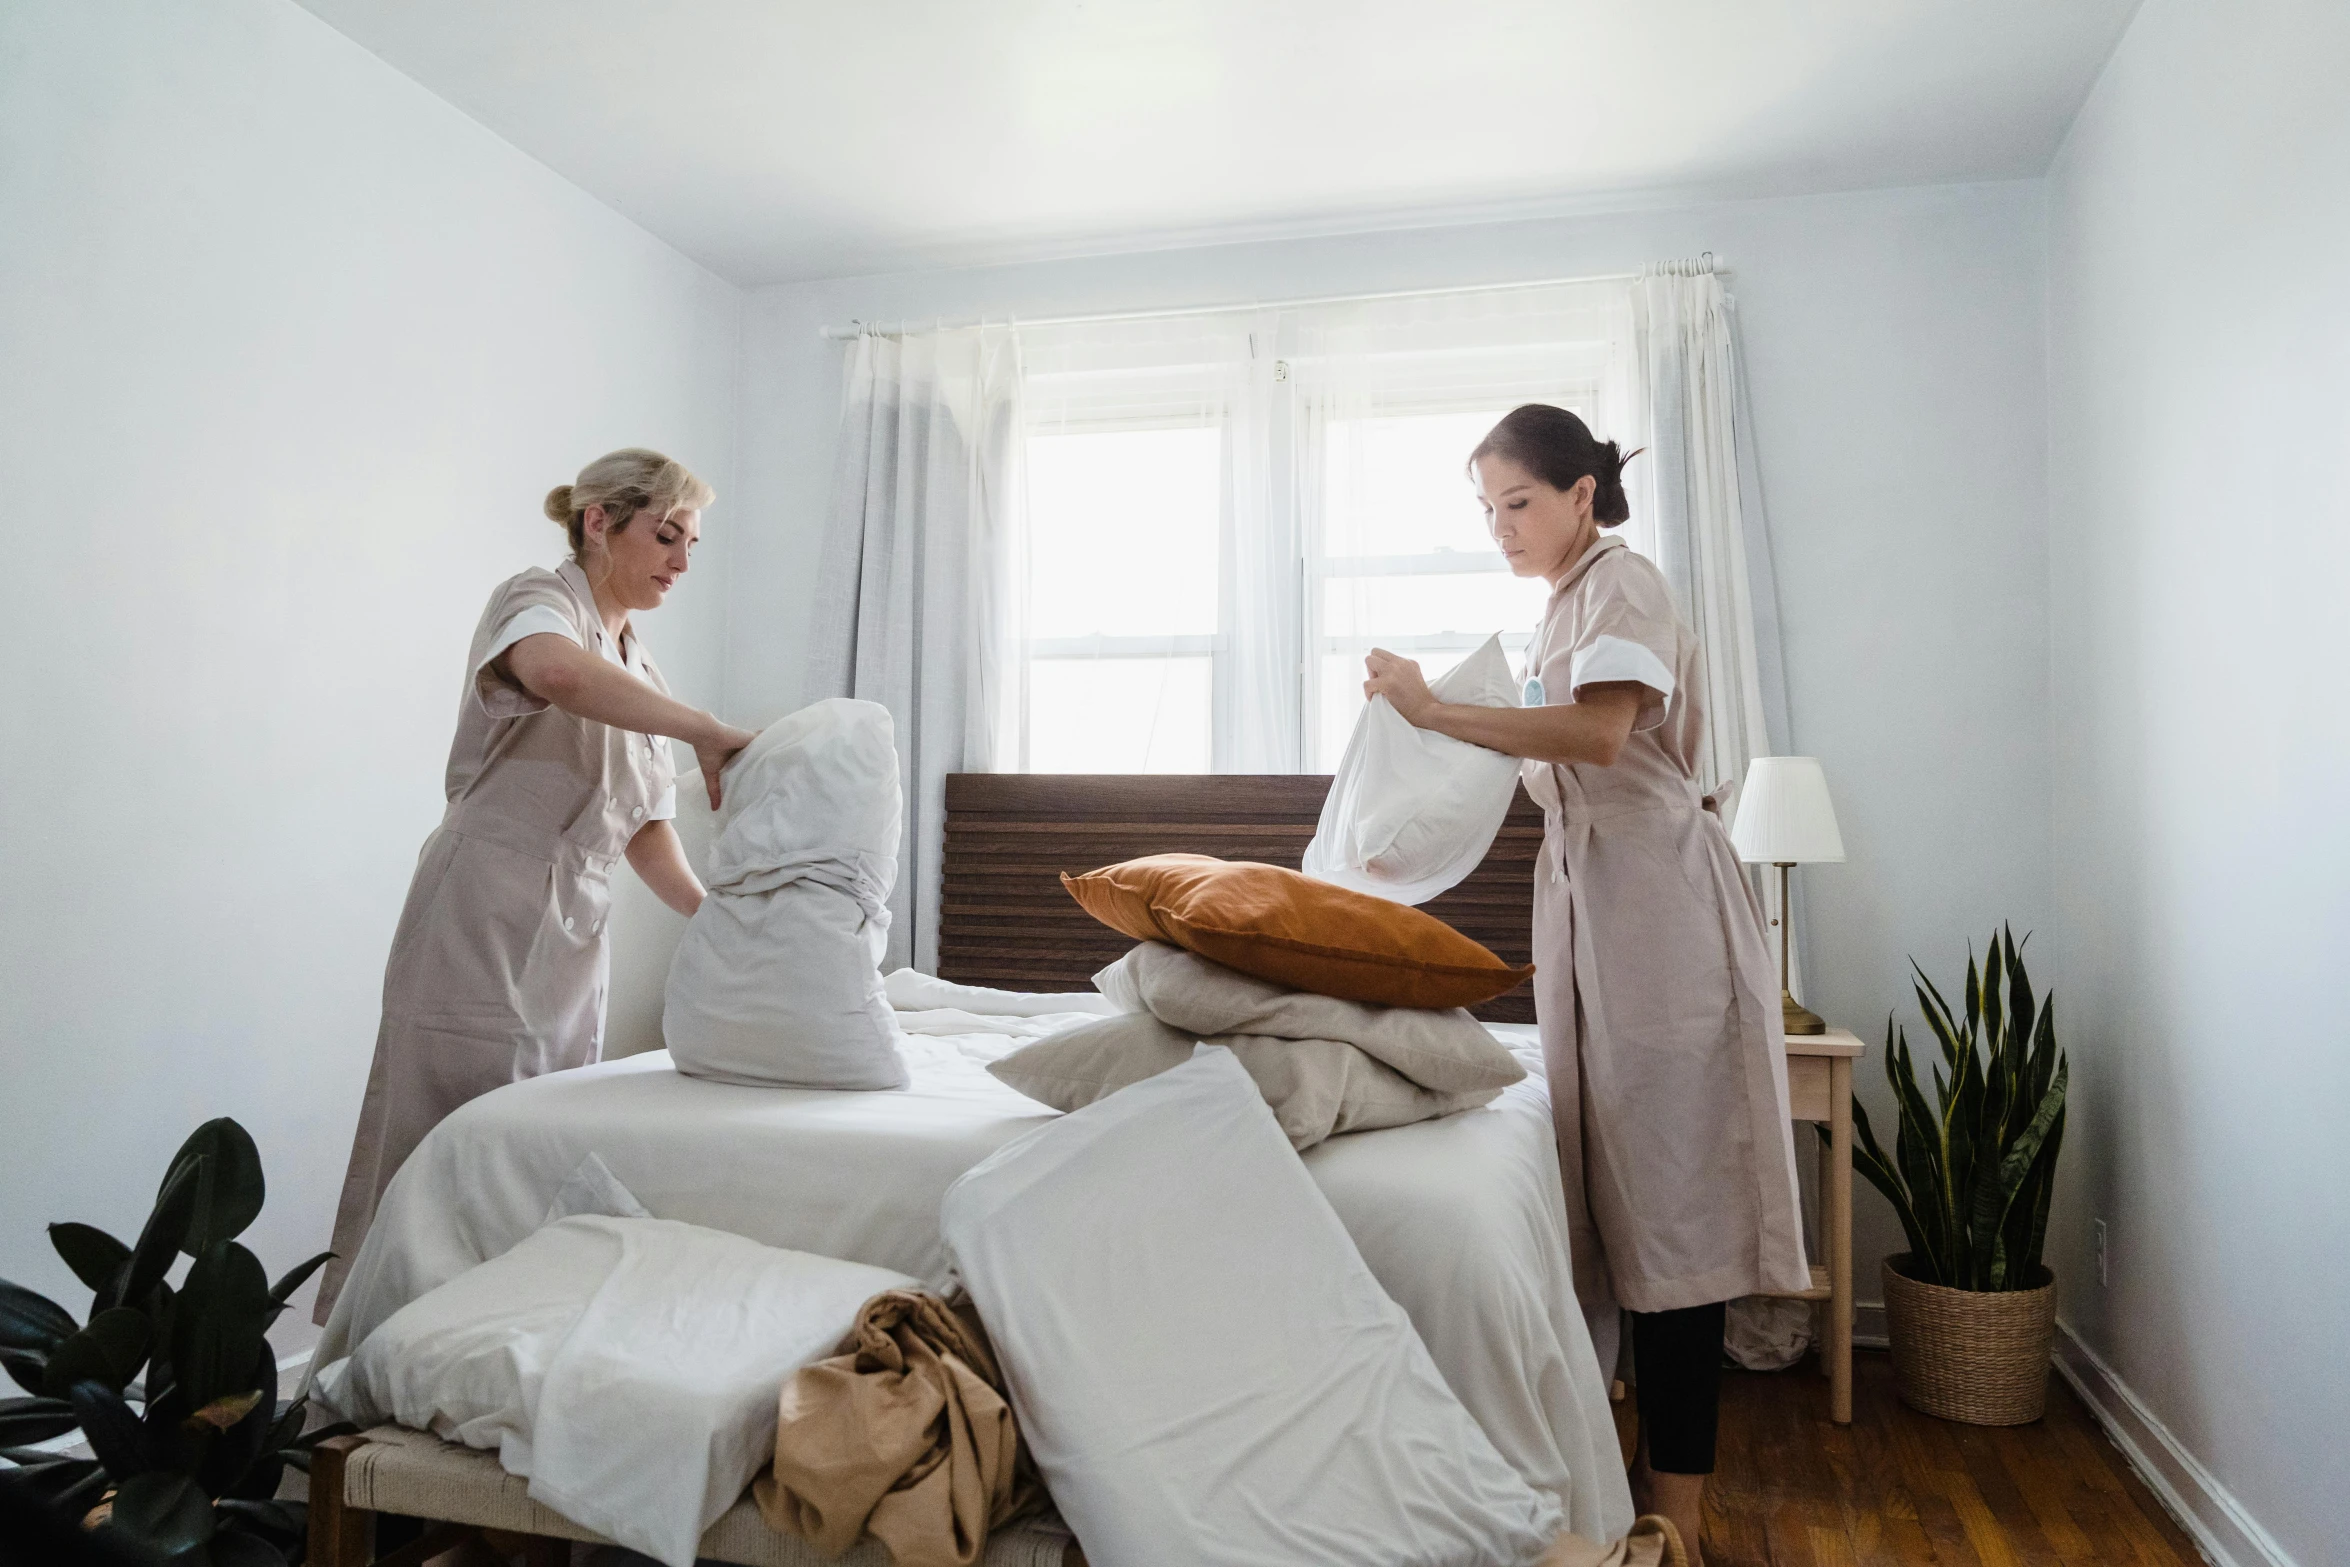 two women prepare to set up pillows on a bed